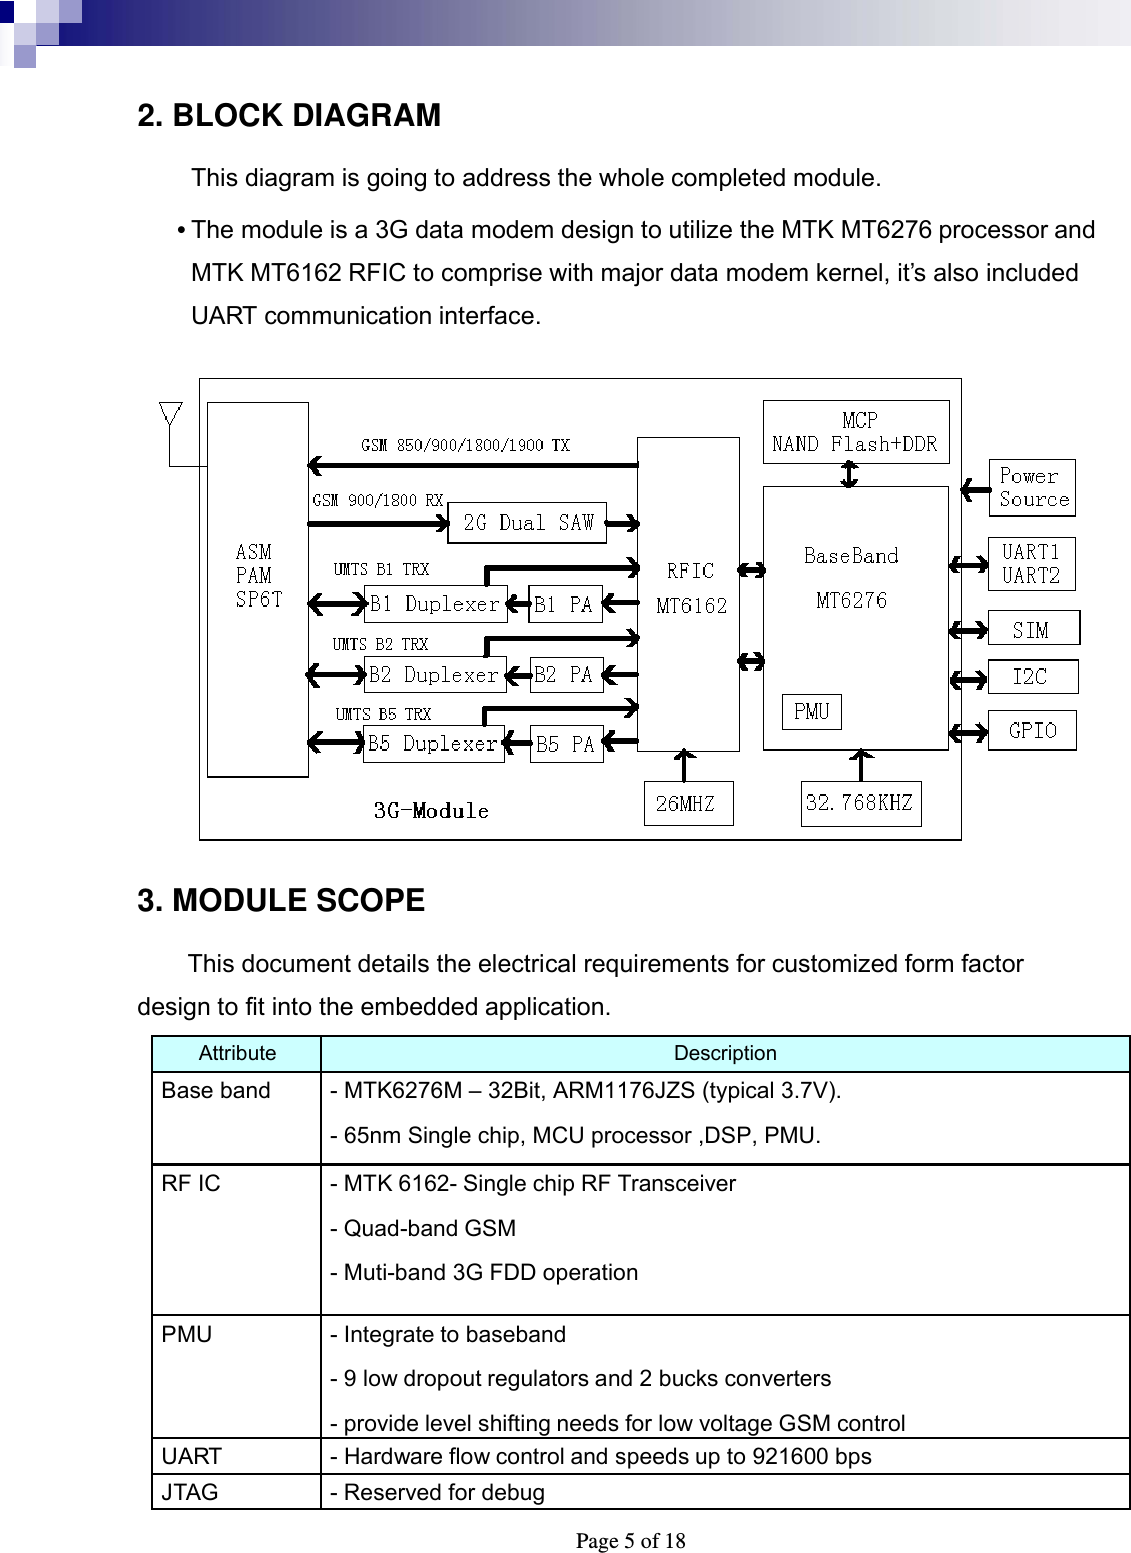  Page 5 of 18 2. BLOCK DIAGRAM  This diagram is going to address the whole completed module. • The module is a 3G data modem design to utilize the MTK MT6276 processor and MTK MT6162 RFIC to comprise with major data modem kernel, it’s also included UART communication interface.   3. MODULE SCOPE     This document details the electrical requirements for customized form factor design to fit into the embedded application. Attribute Description Base band  - MTK6276M – 32Bit, ARM1176JZS (typical 3.7V). - 65nm Single chip, MCU processor ,DSP, PMU. RF IC  - MTK 6162- Single chip RF Transceiver - Quad-band GSM - Muti-band 3G FDD operation PMU - Integrate to baseband - 9 low dropout regulators and 2 bucks converters - provide level shifting needs for low voltage GSM control UART  - Hardware flow control and speeds up to 921600 bps JTAG  - Reserved for debug 